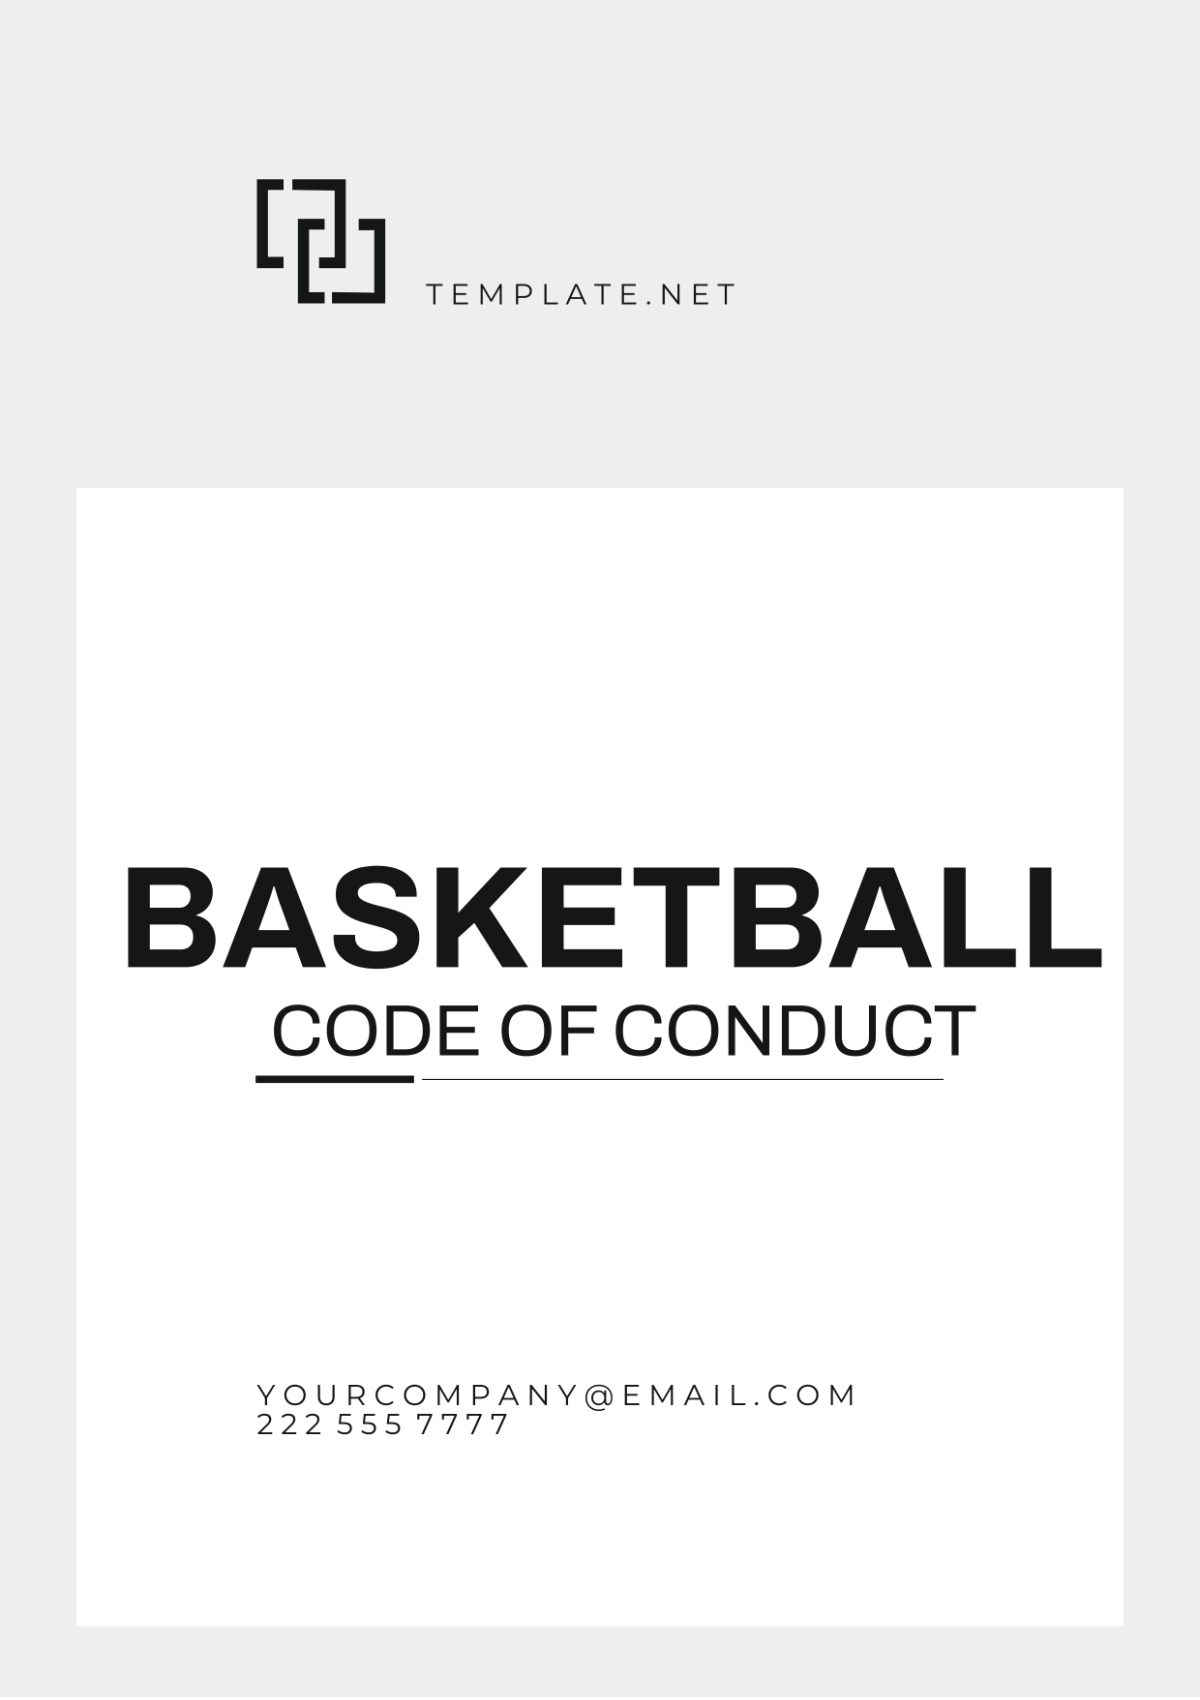 Basketball Code of Conduct Template